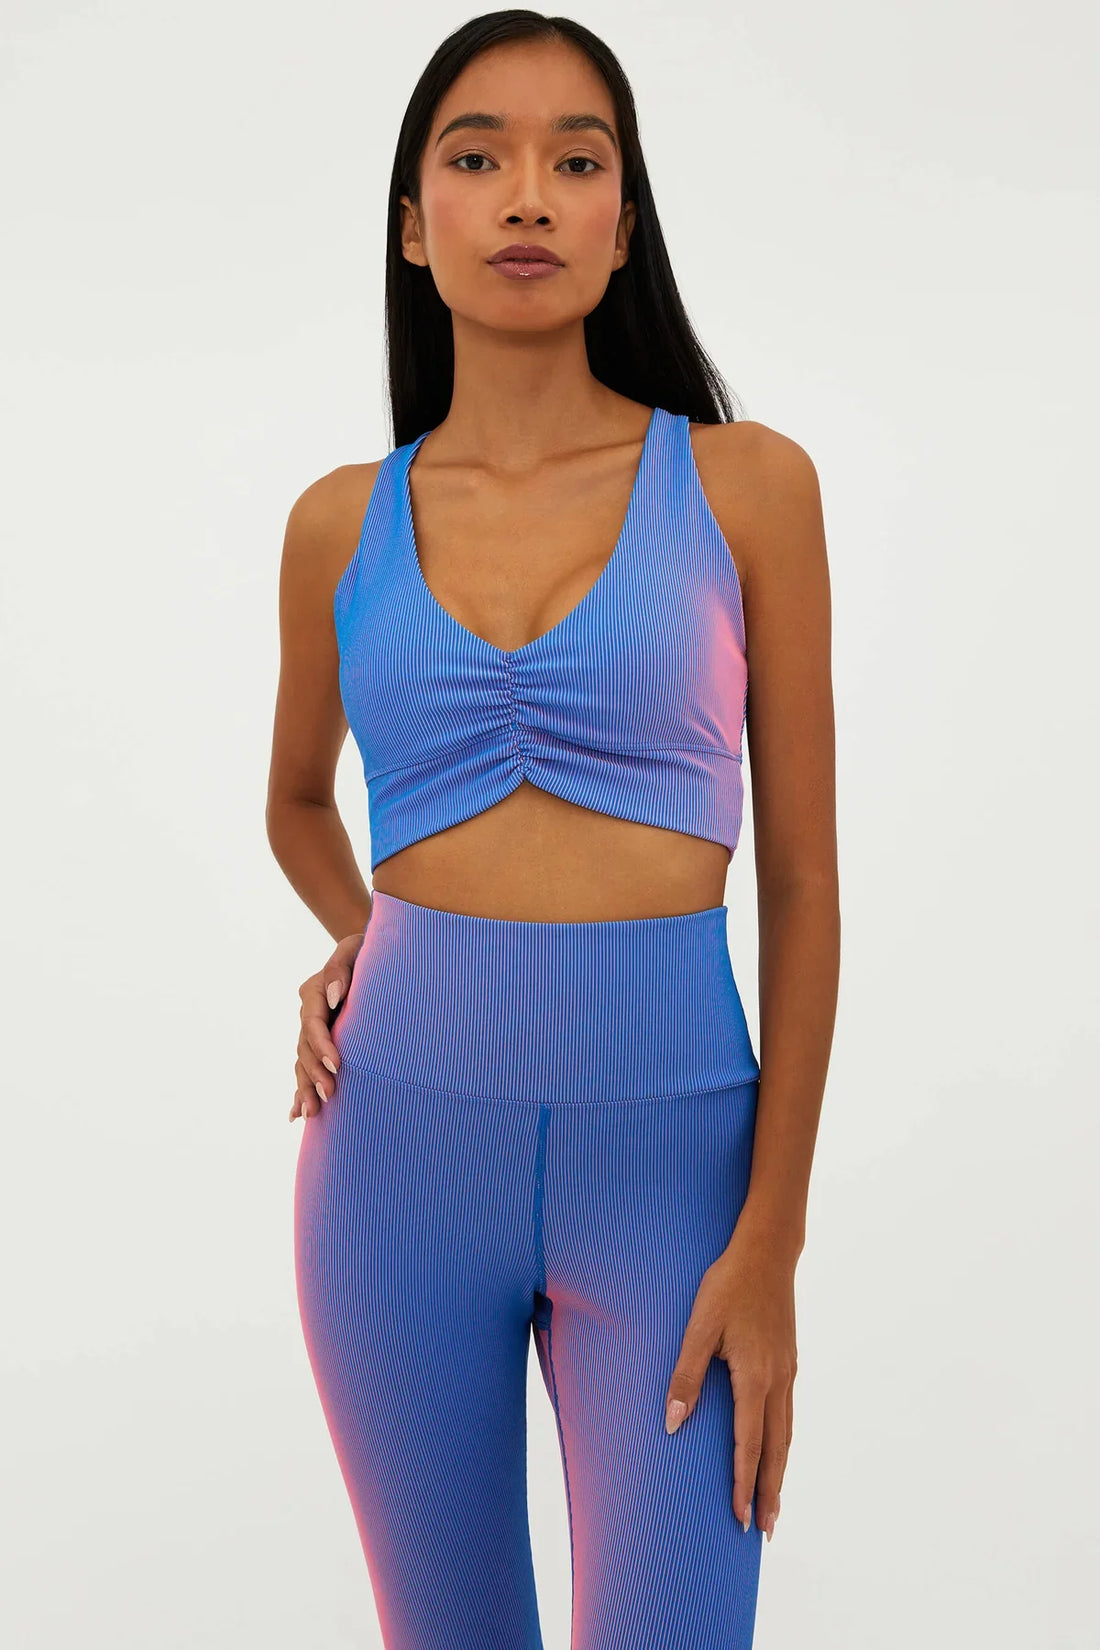 Shop Beach Riot Mindy Gym Top in Imperial Two Tone Rib - Premium Crop Top from Beach Riot Online now at Spoiled Brat 